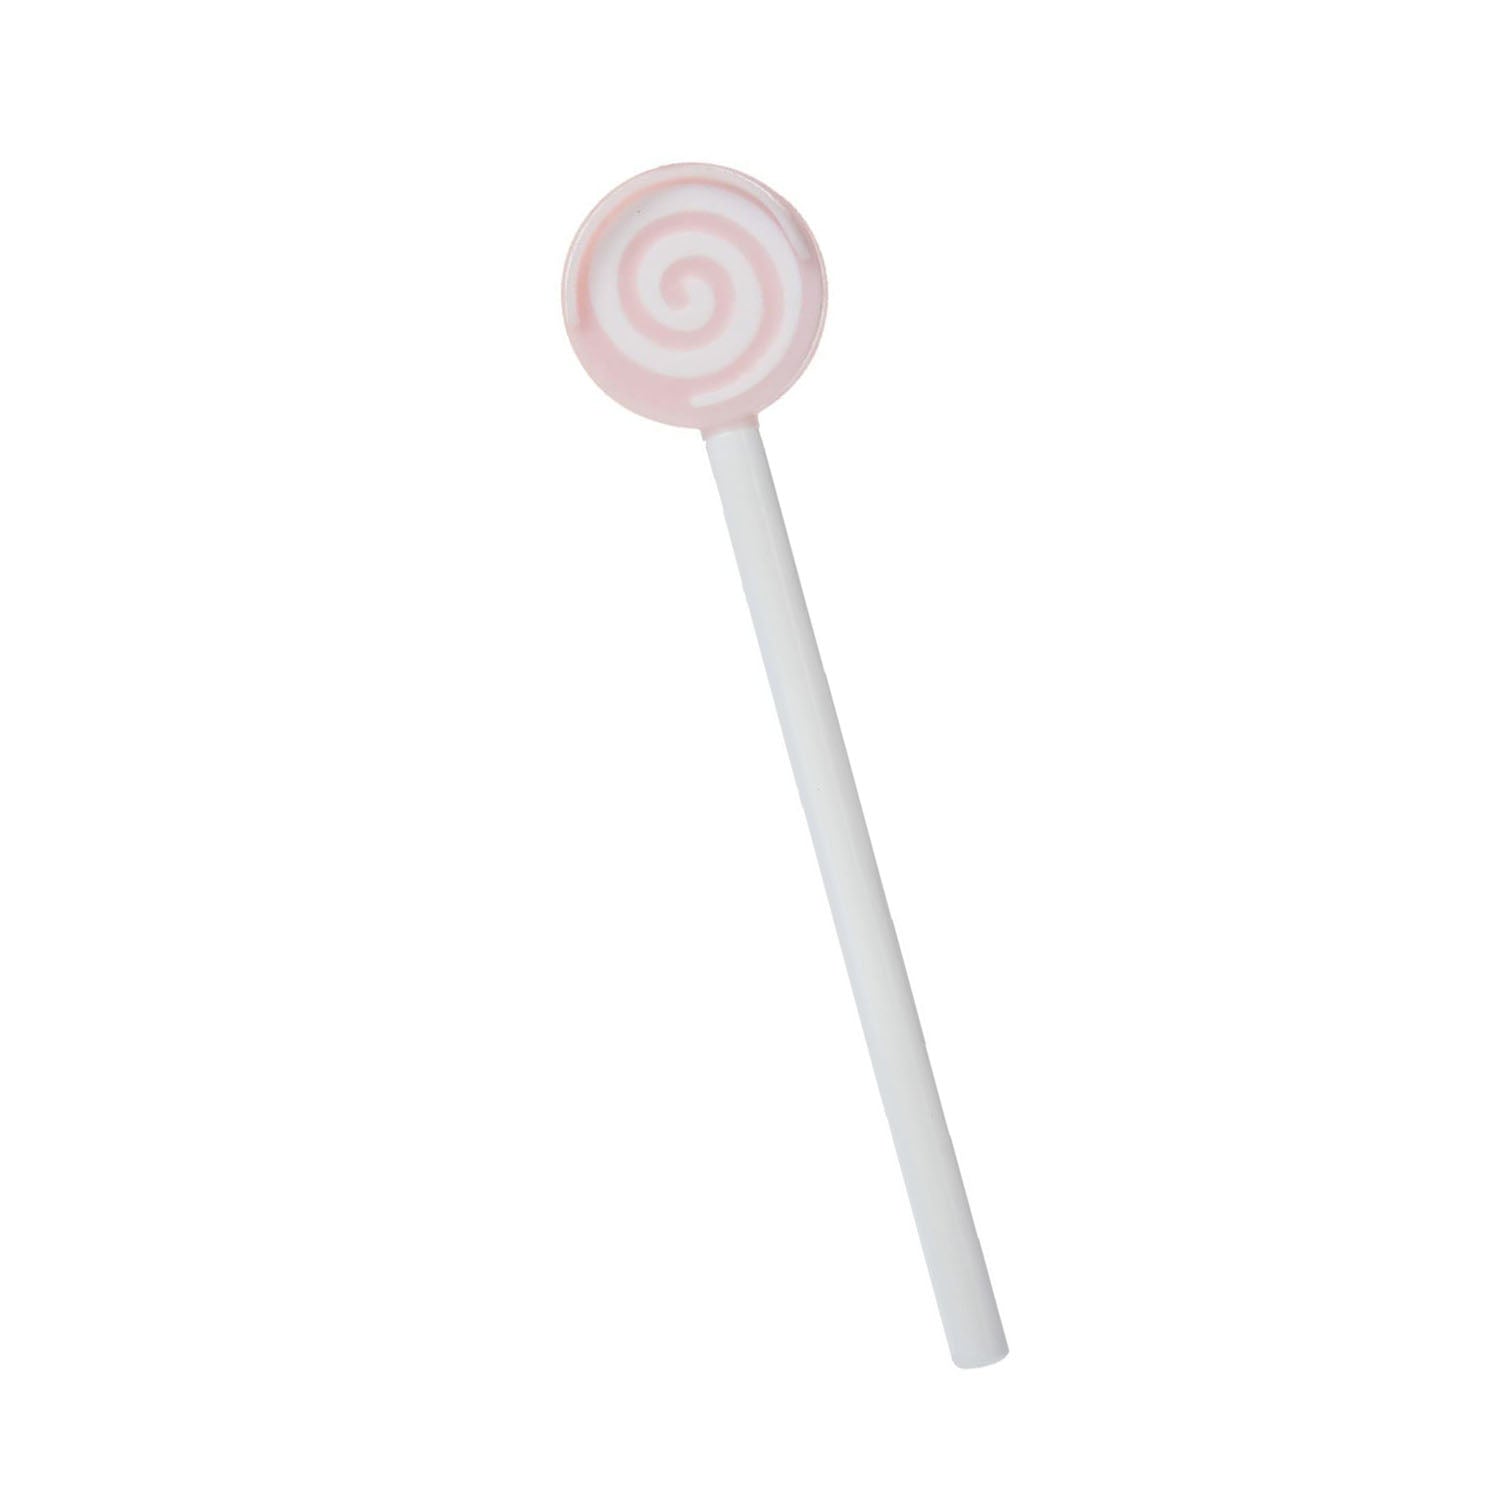 HOPOP Candy Tongue Cleaner For Babies - Pink 6m+